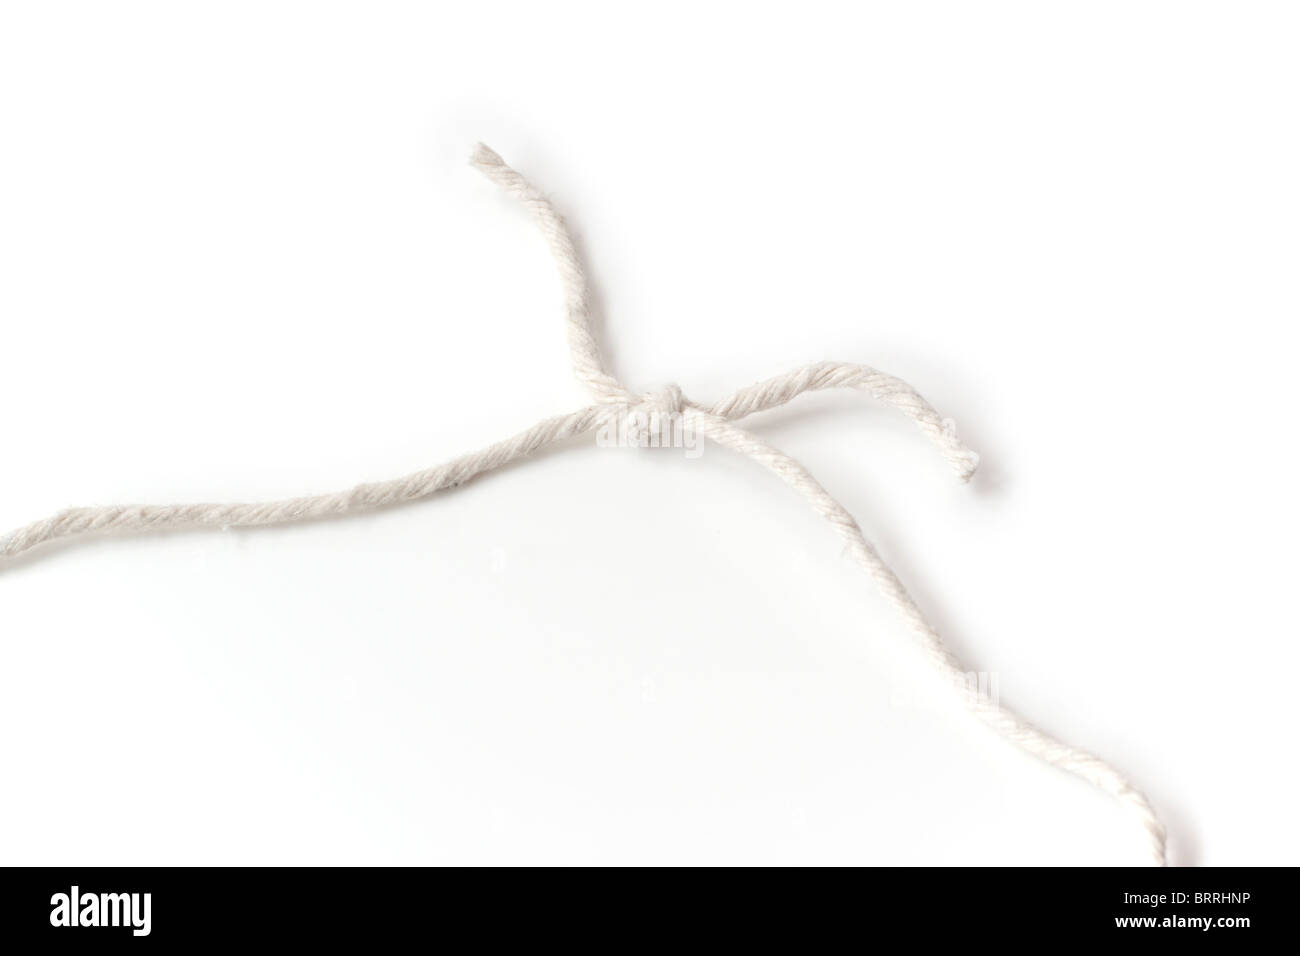 A piece of string Stock Photo